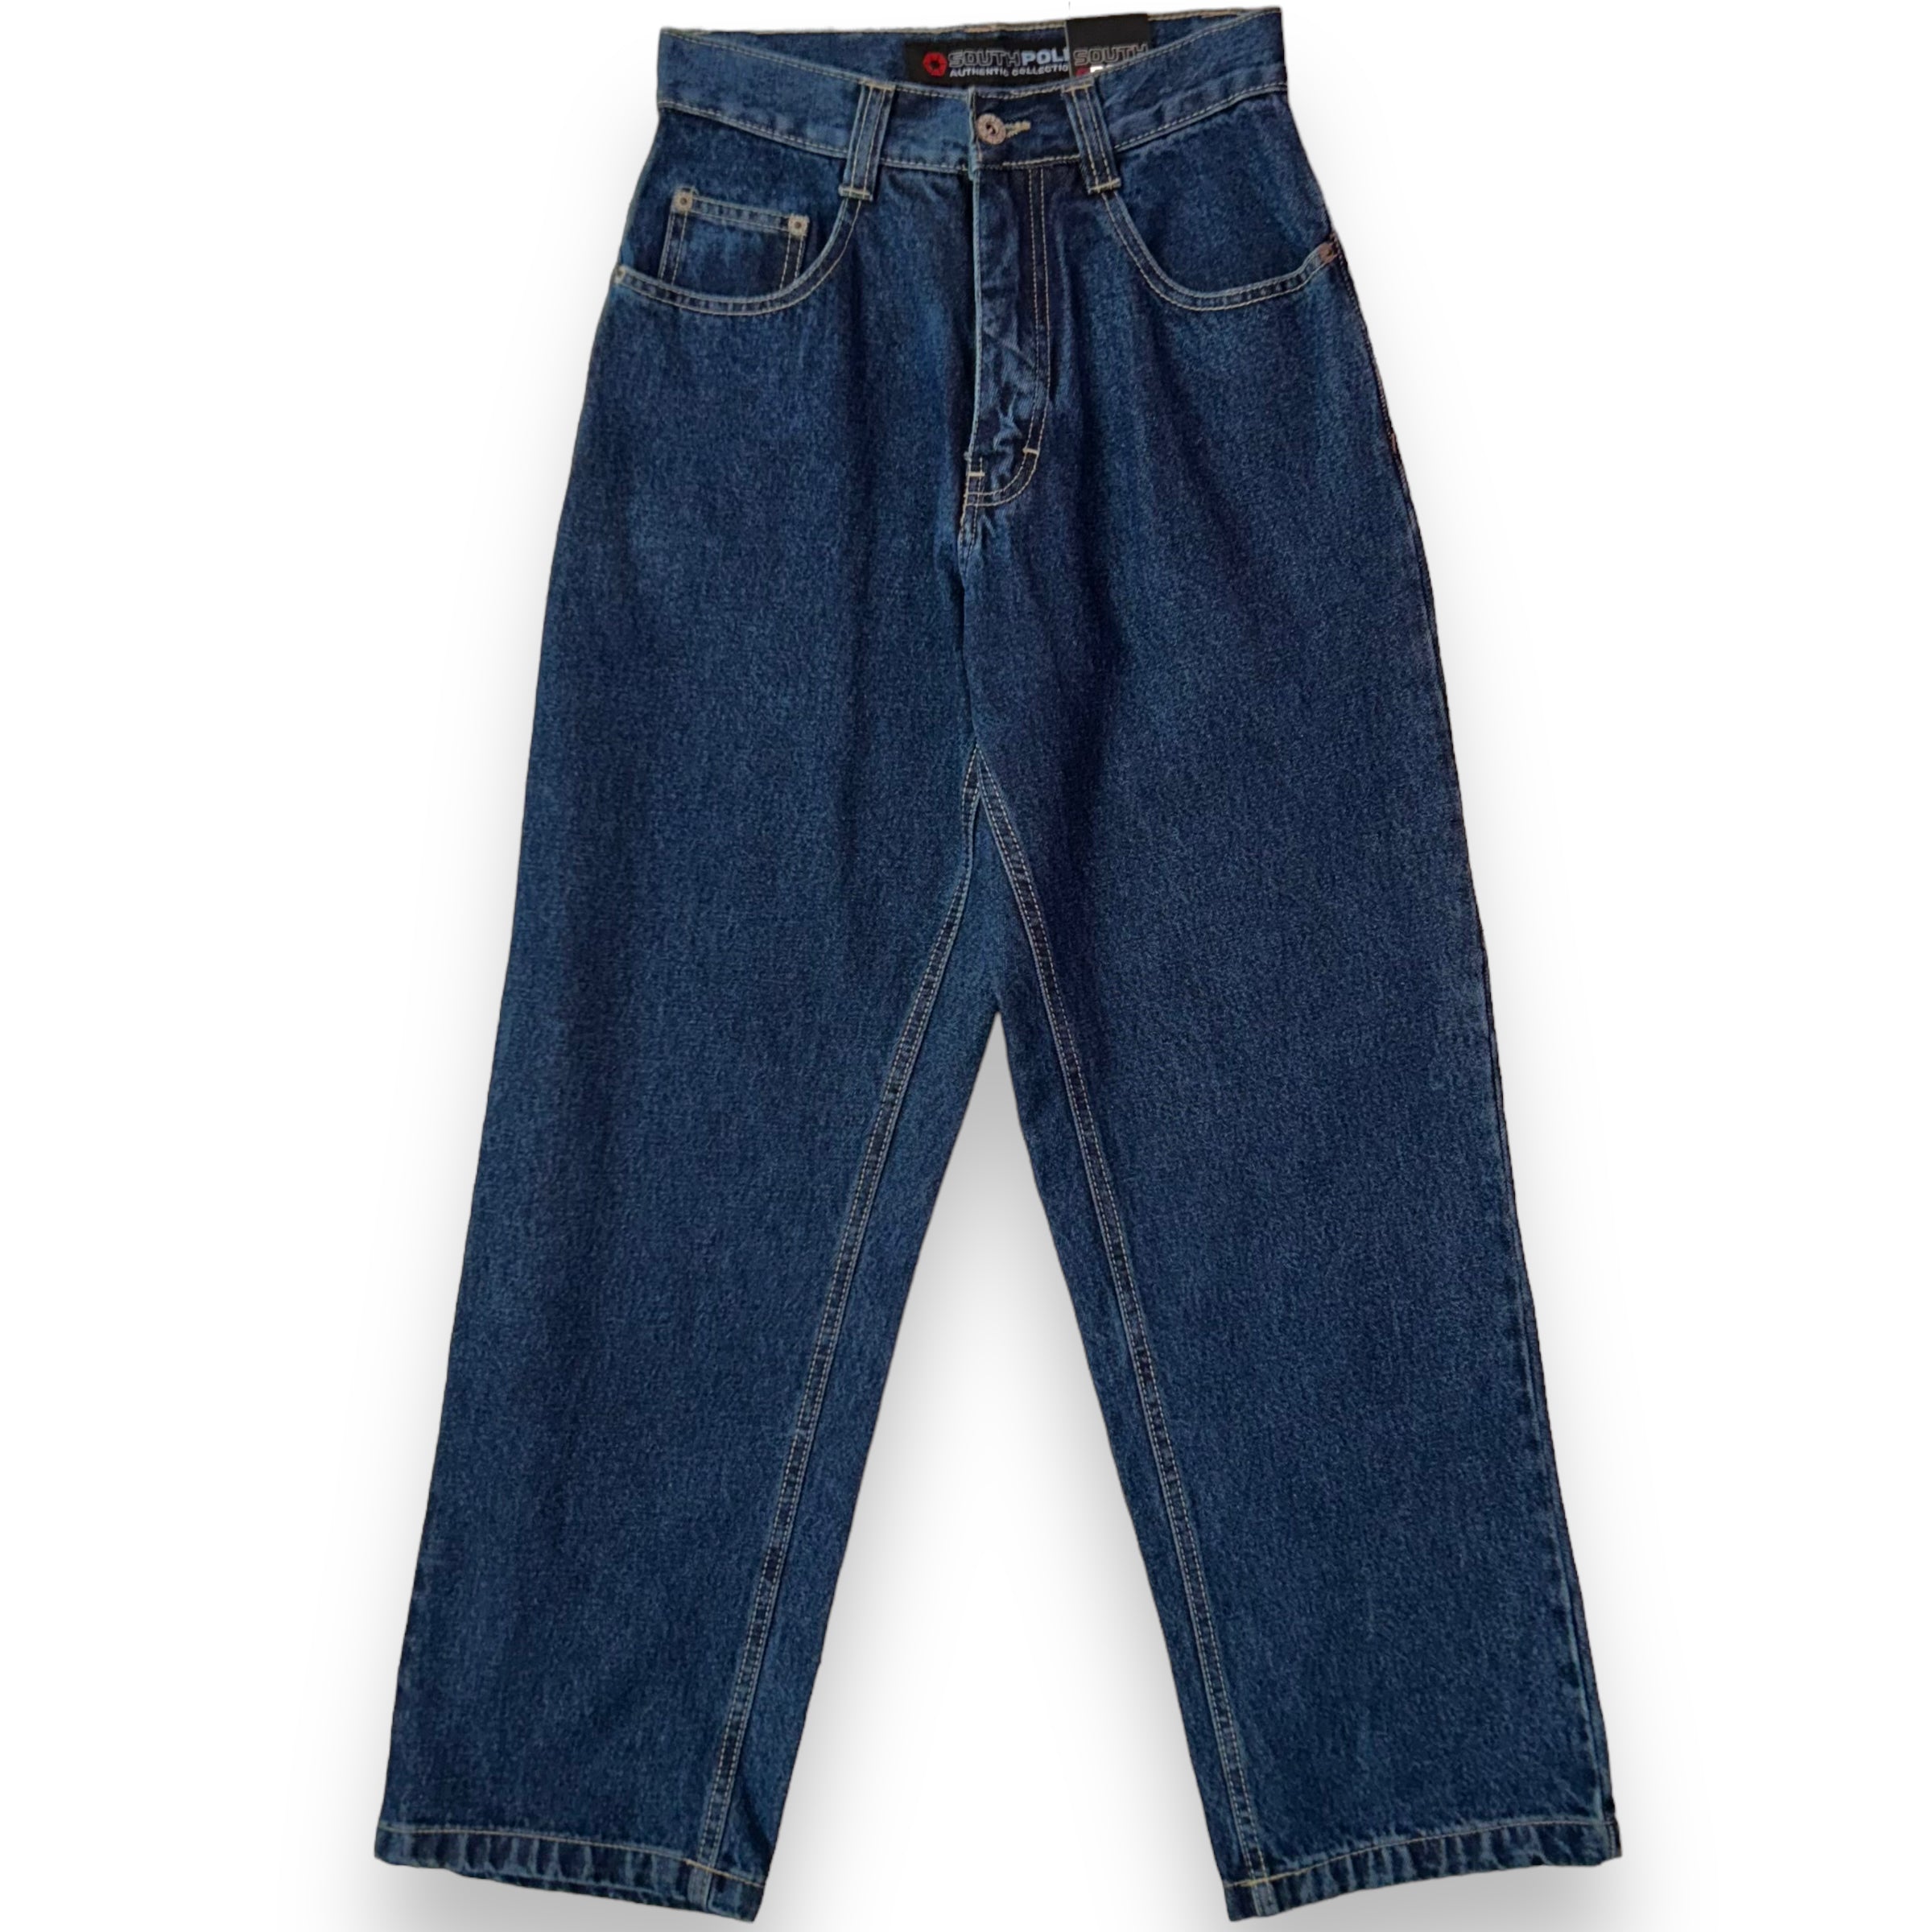 Baggy Jeans SouthPole (26 US XS)